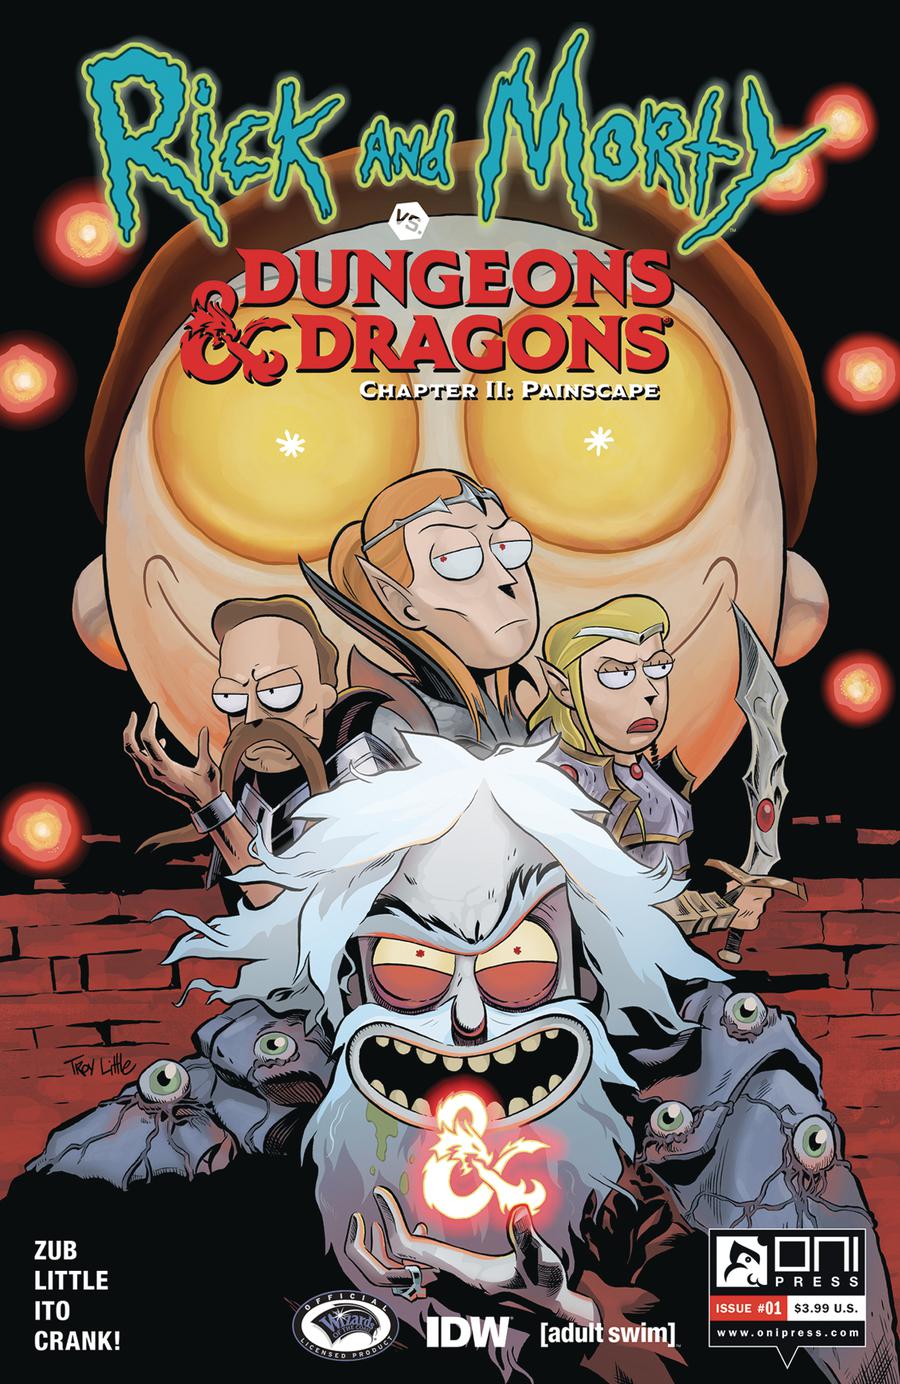 Rick And Morty vs Dungeons & Dragons Chapter II Painscape #1 Cover A Regular Leonardo Ito Cover